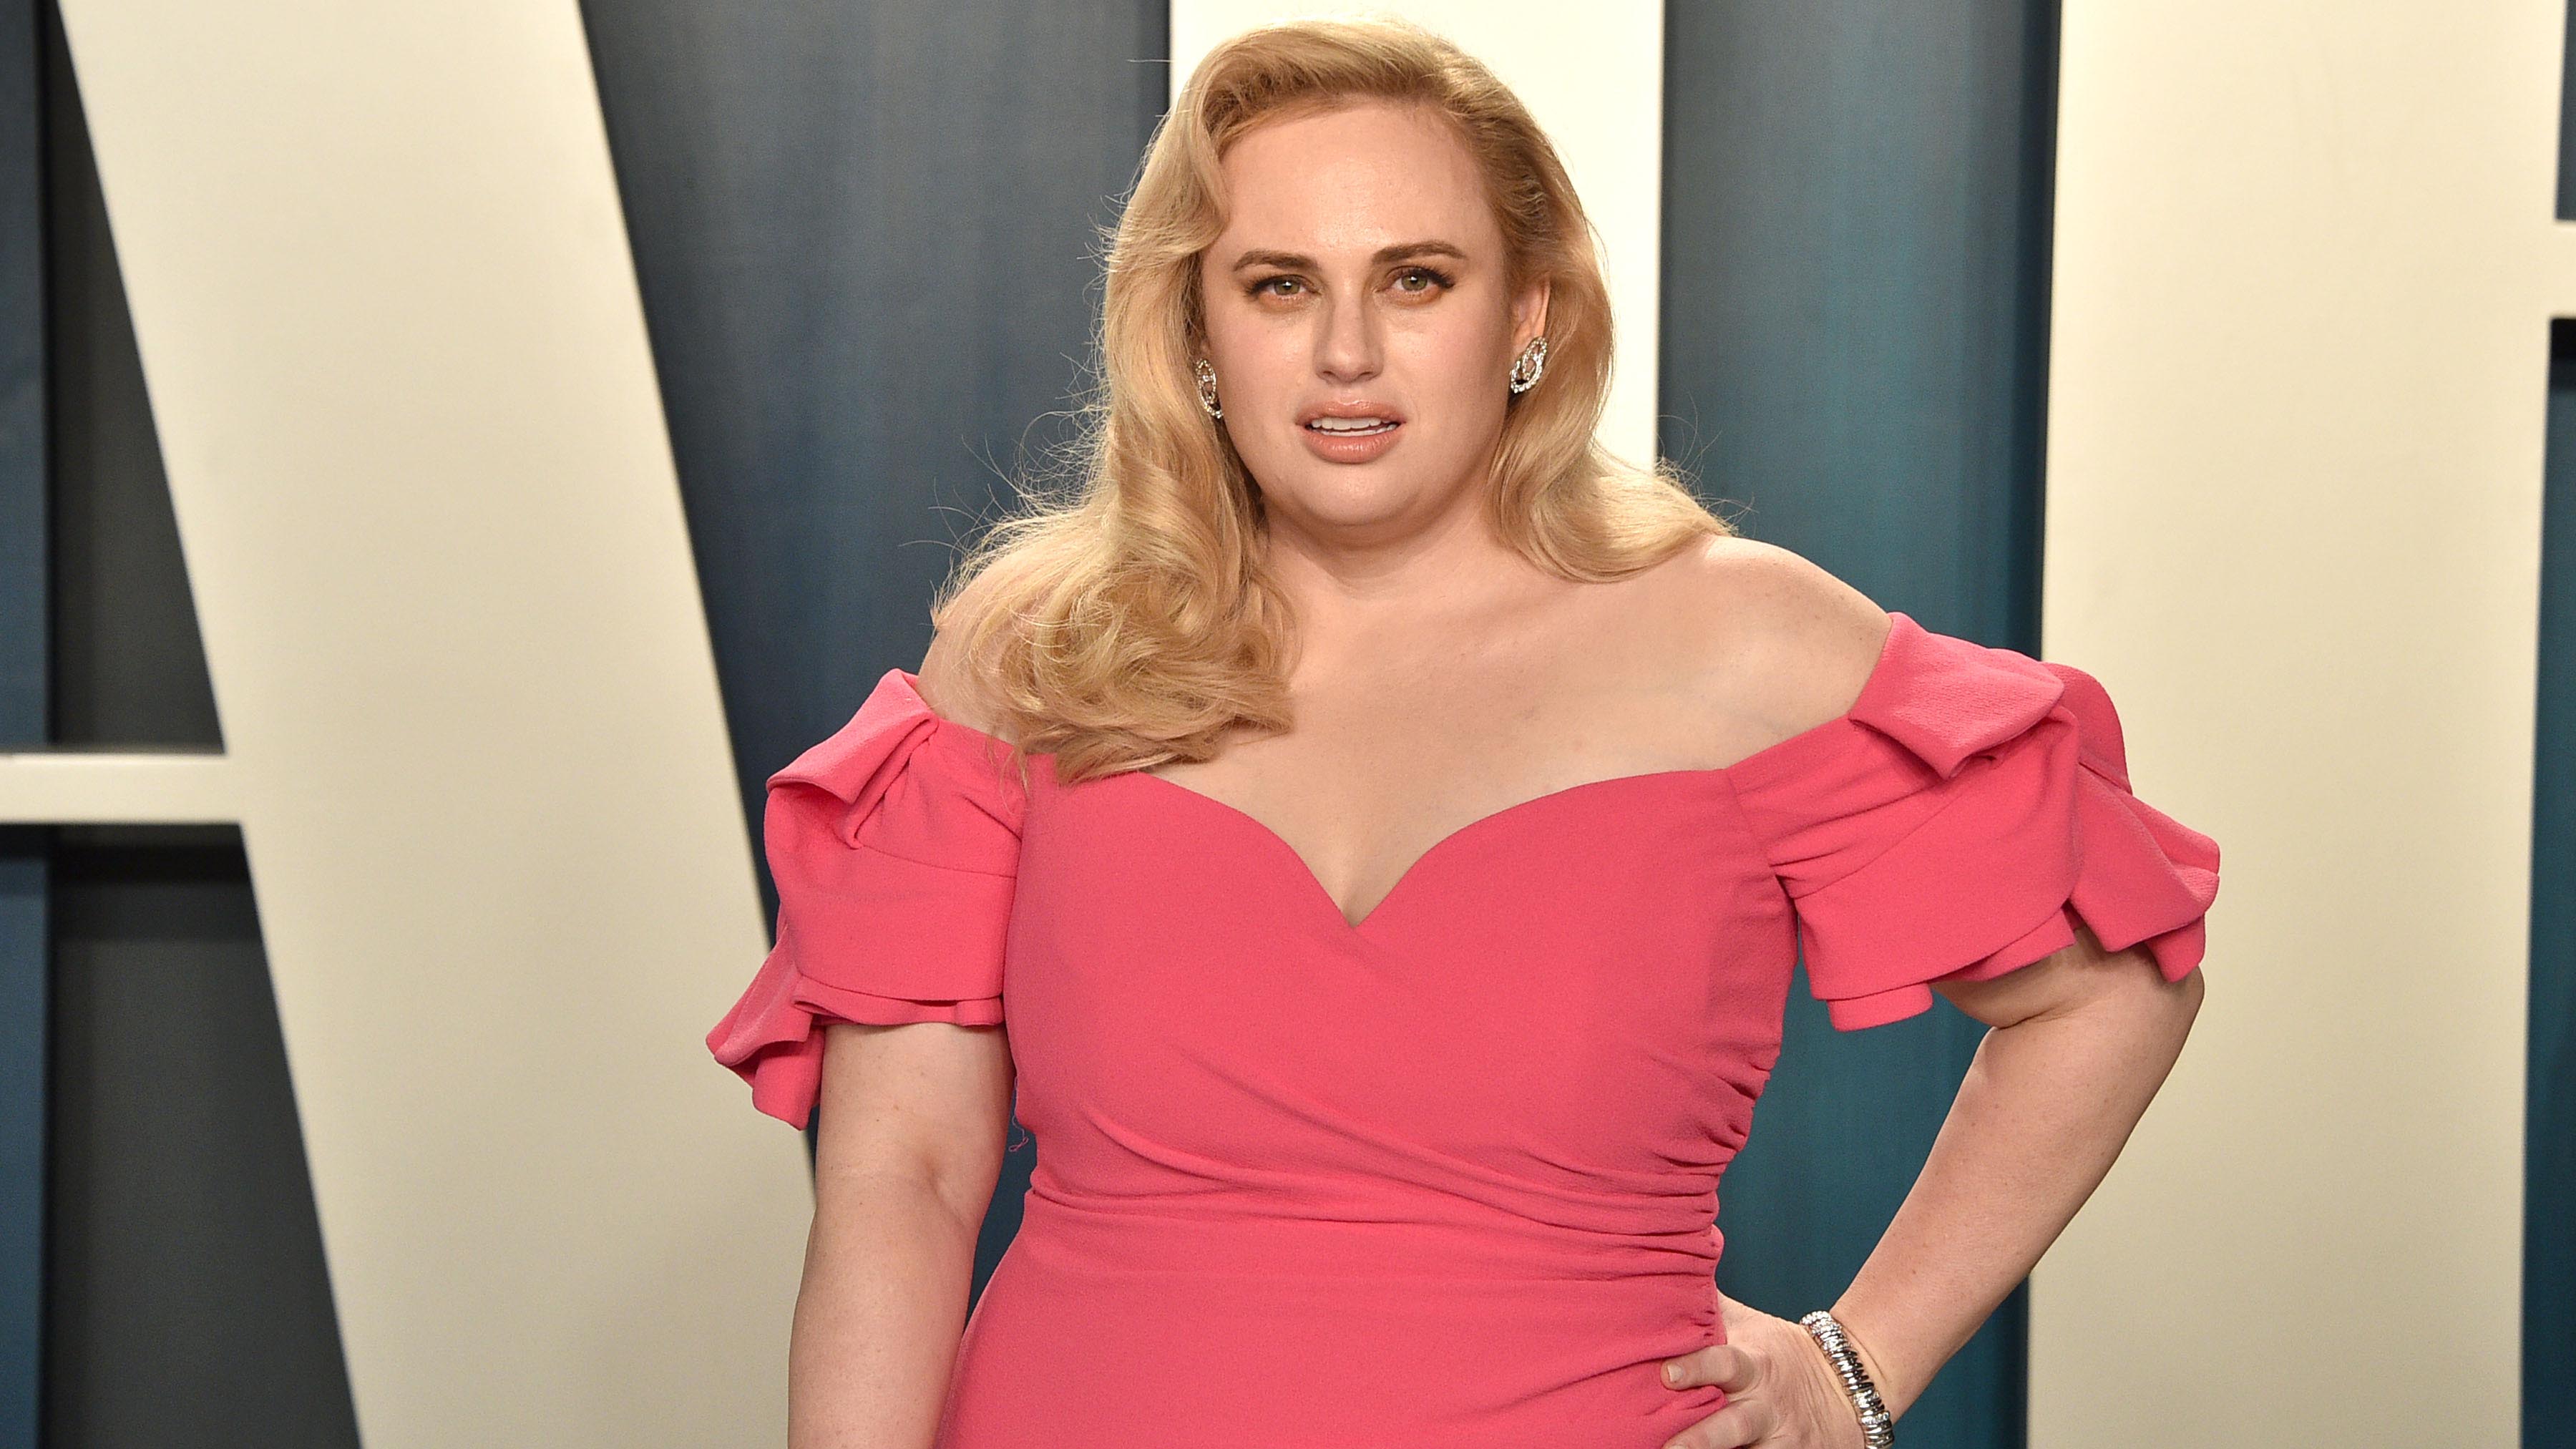 Loss weight rebel wilson This Is